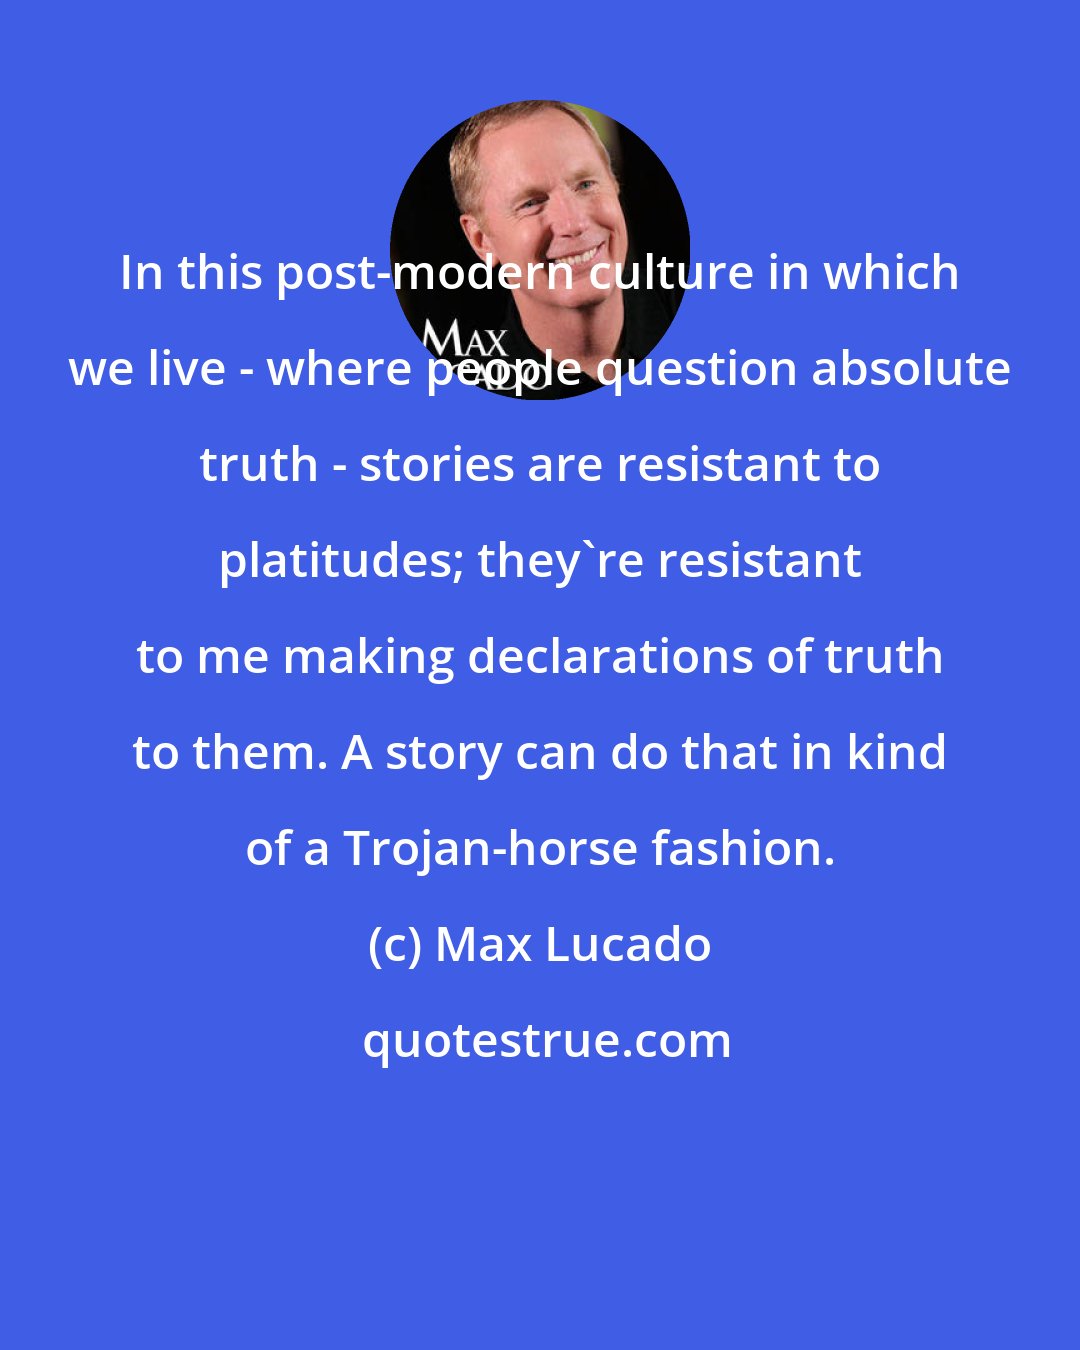 Max Lucado: In this post-modern culture in which we live - where people question absolute truth - stories are resistant to platitudes; they're resistant to me making declarations of truth to them. A story can do that in kind of a Trojan-horse fashion.